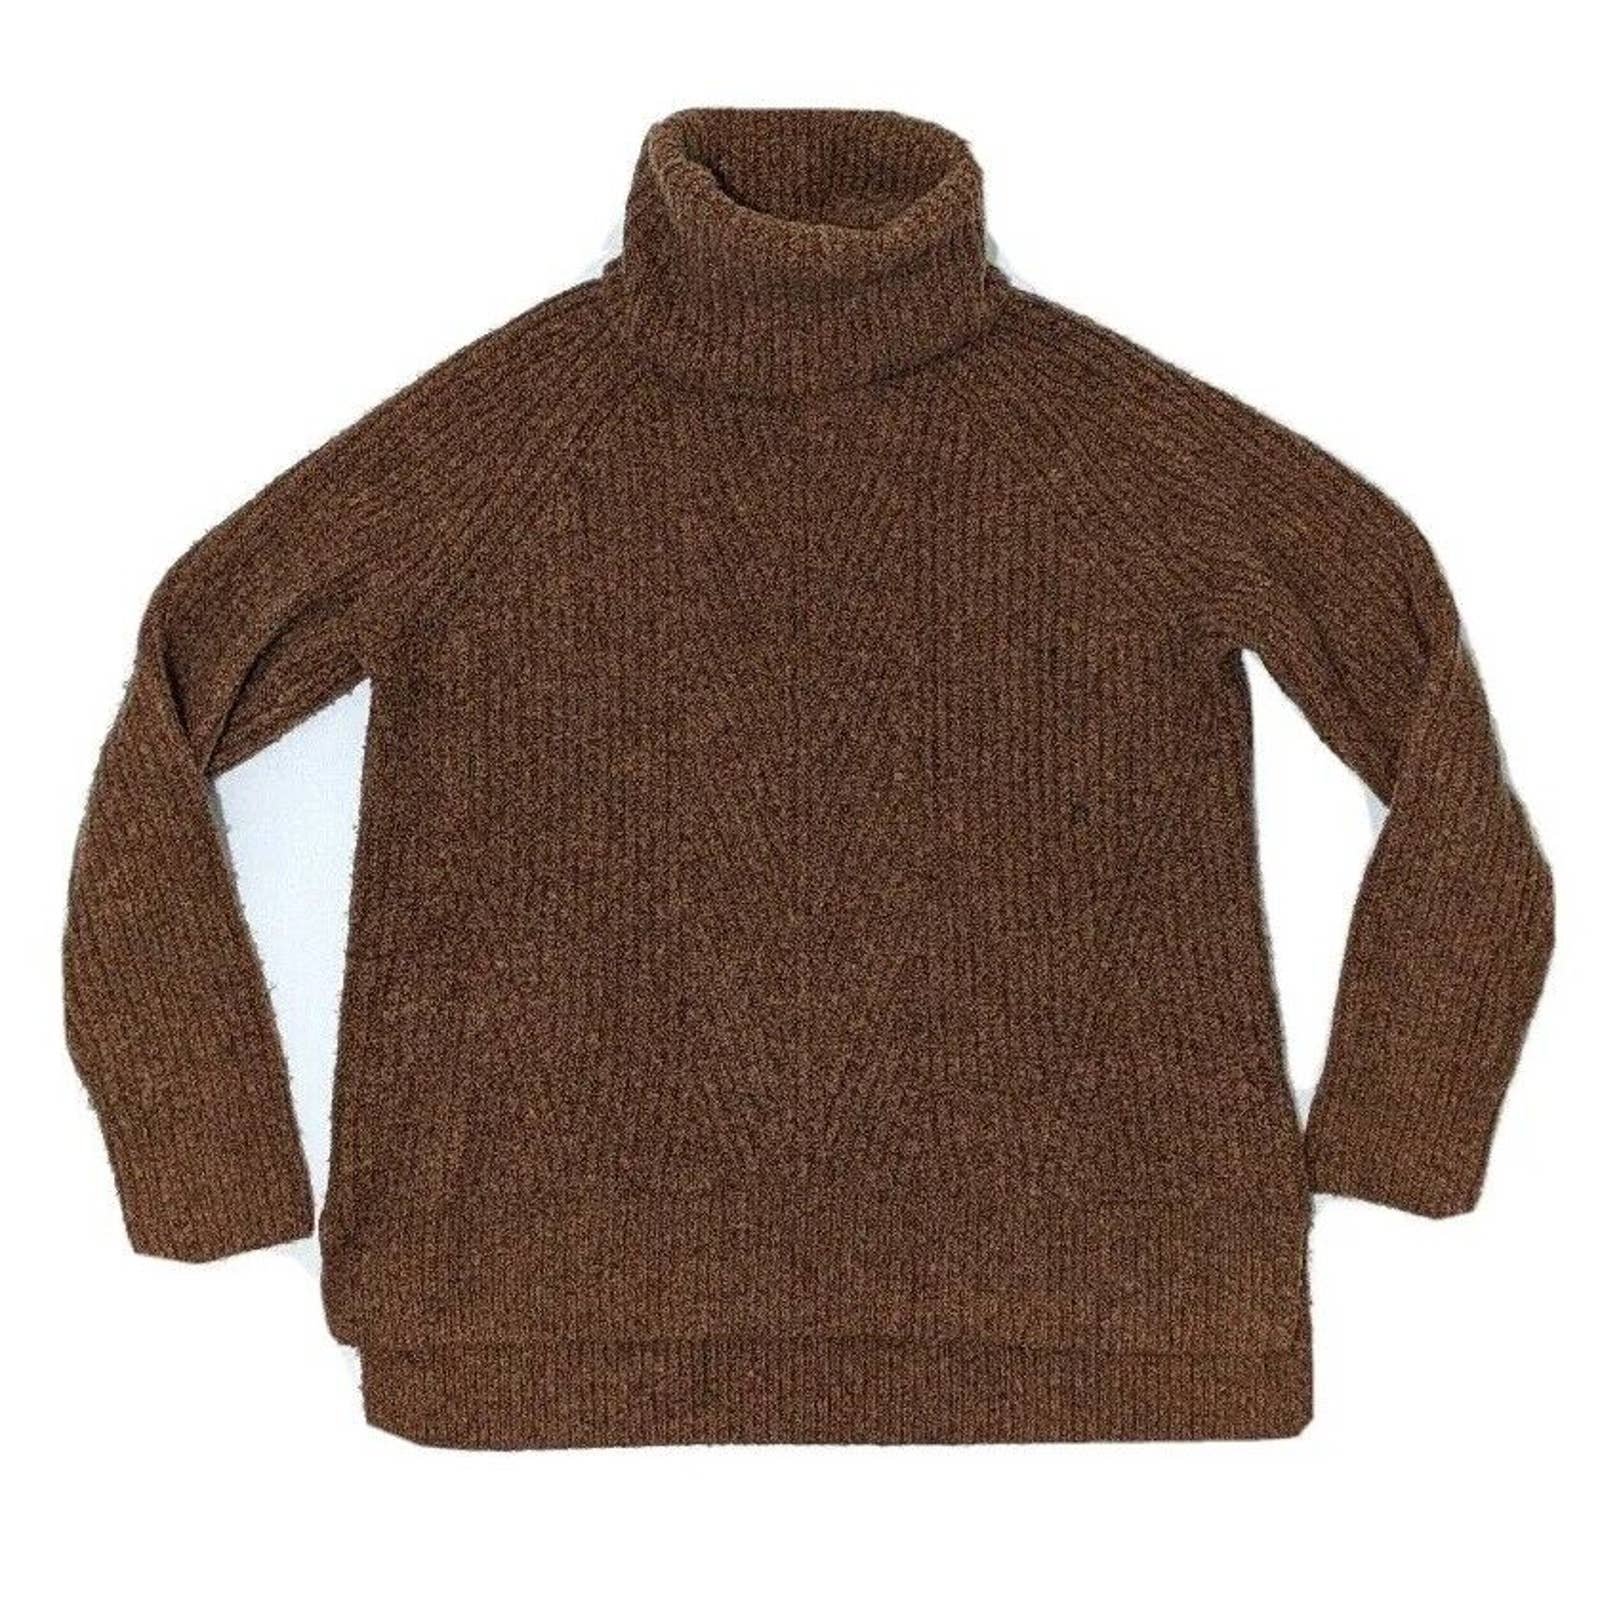 good price Madewell Mercer Turtleneck Sweater in Coziest Yarn Heather Cider Brown Sz Small PPeptAU9j Outlet Store